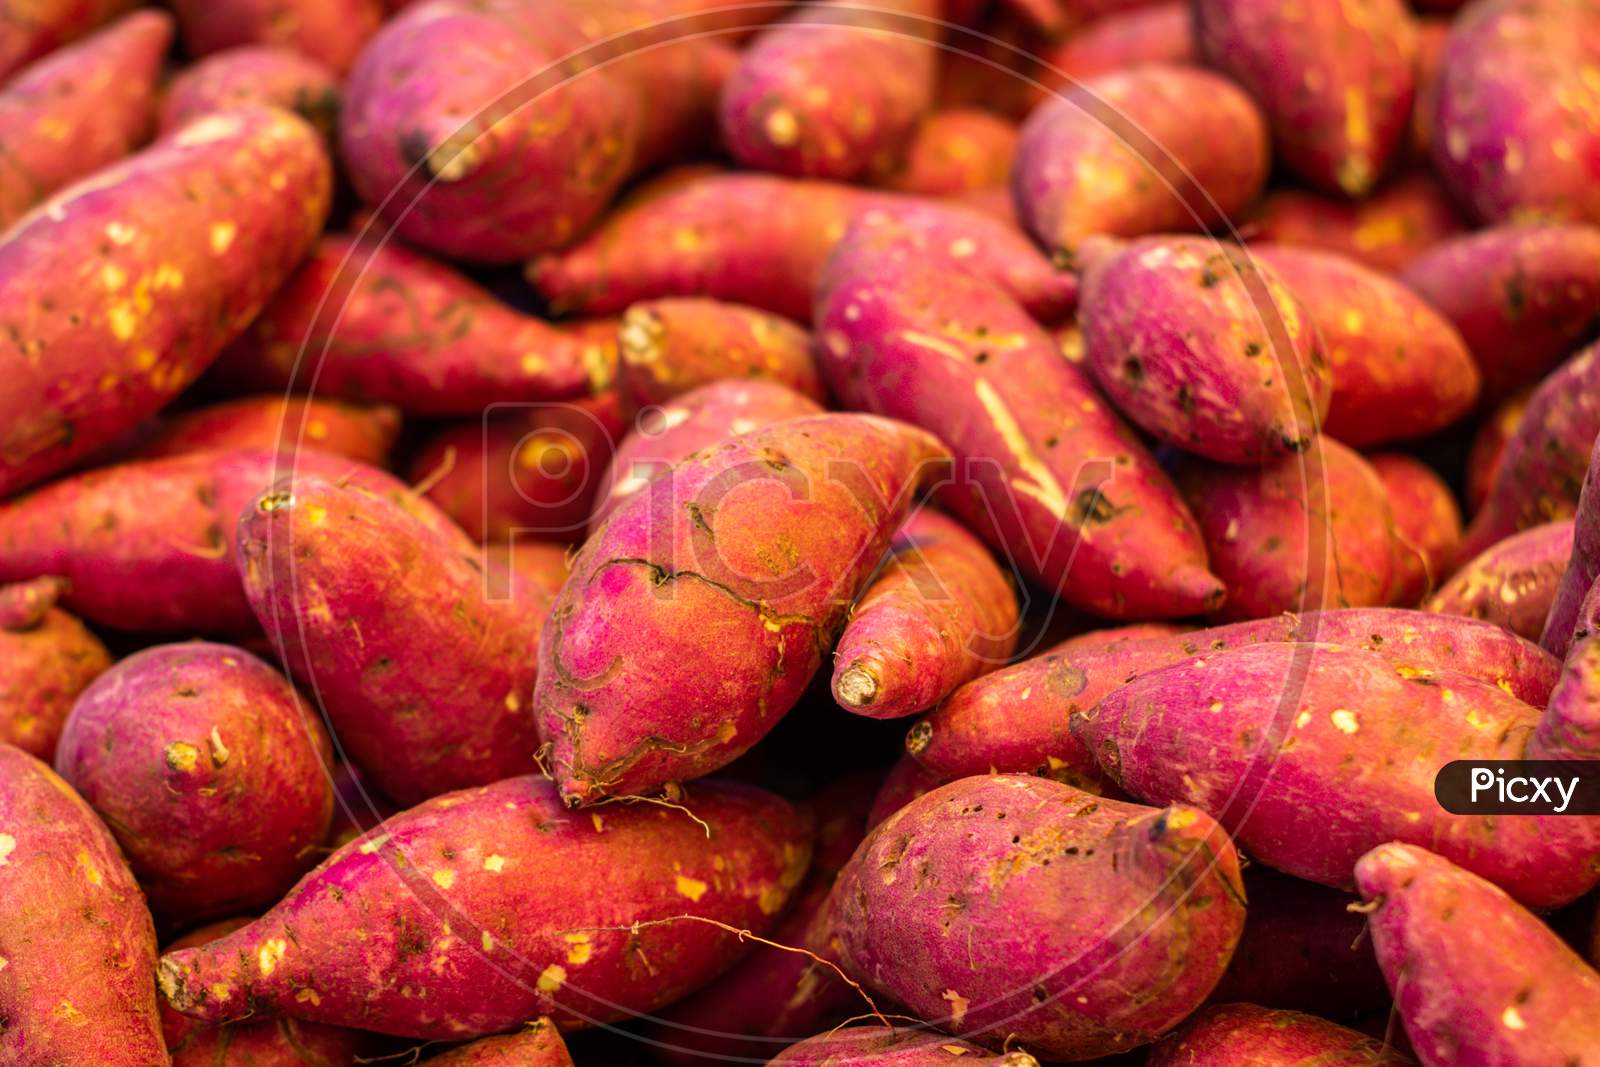 Numerous Sweet Potatoes Freshly Harvested With Pink Peel. Food For Vegetarians And Vegans.